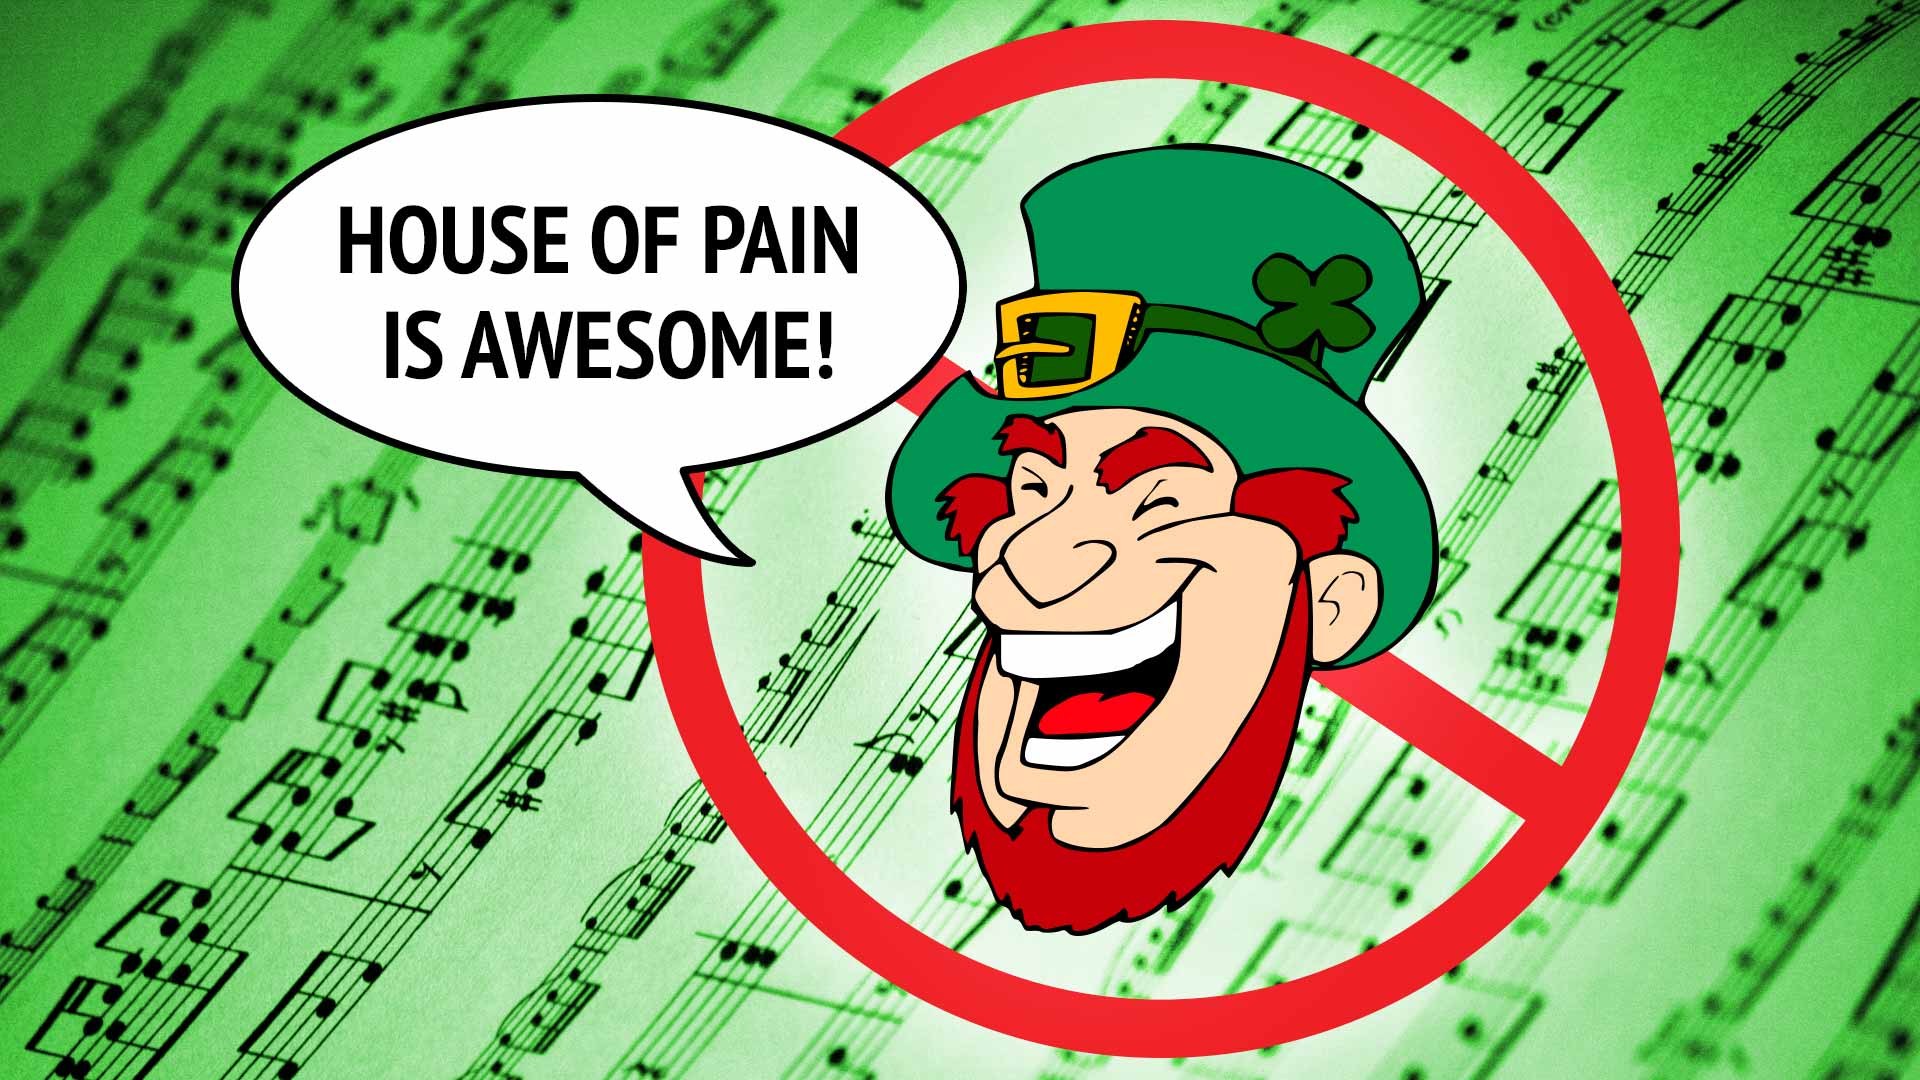 10 Rejected St. Patrick's Day Playlist Songs